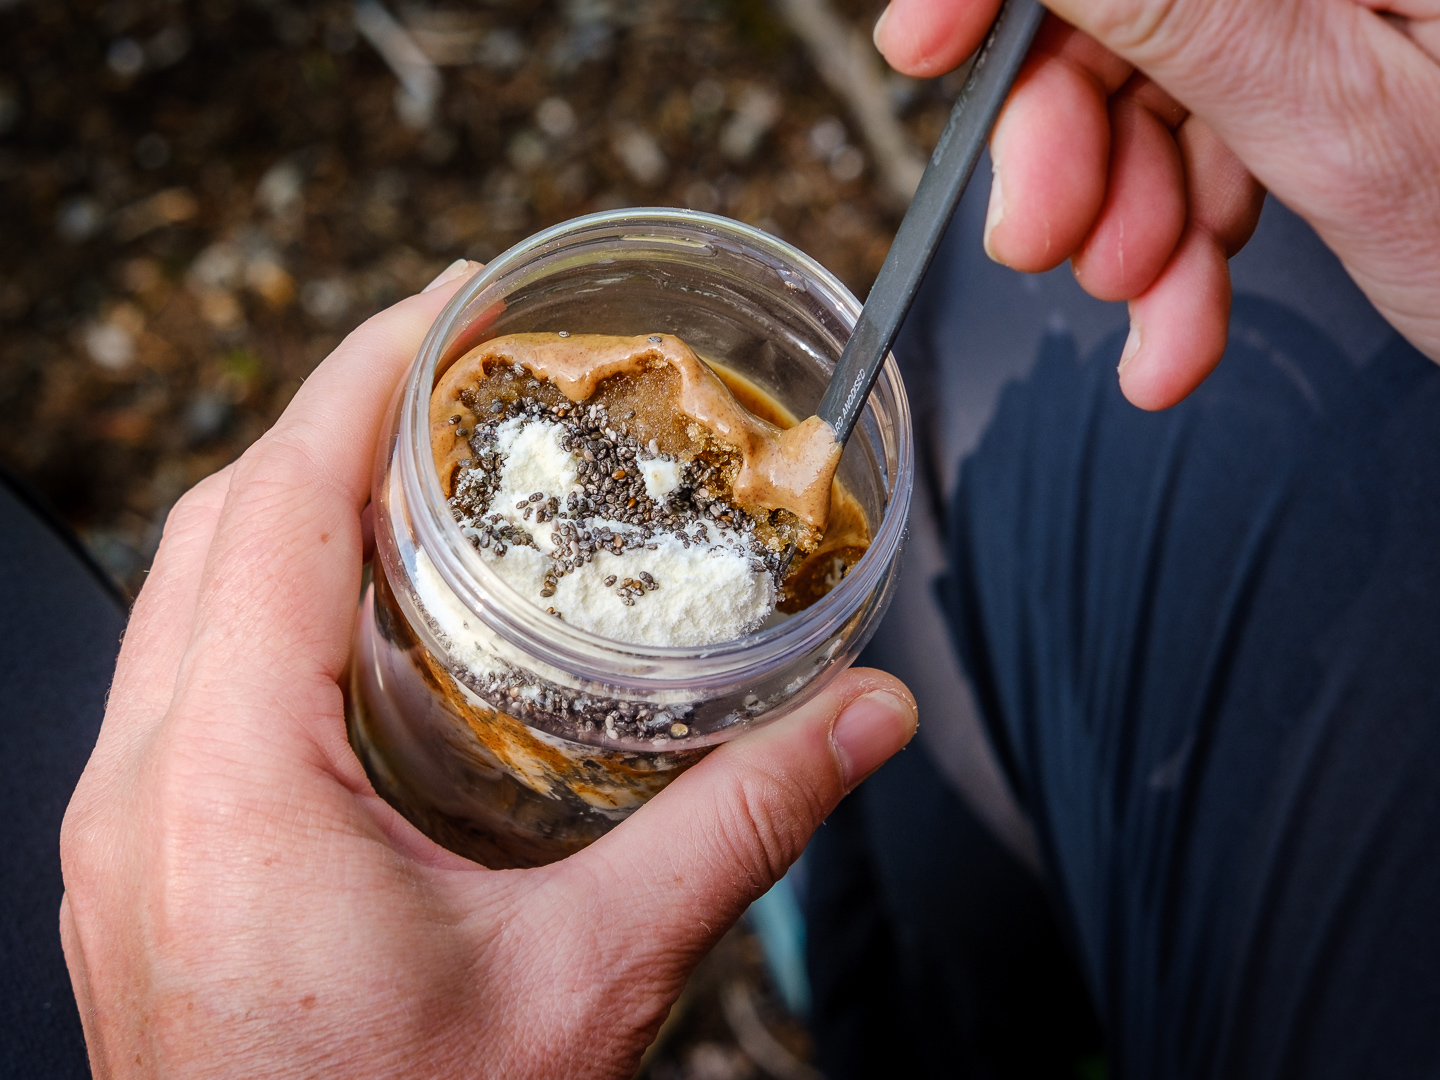 Do you like overnight oats for breakfast? This easy-to-prepare cold soak backpacking recipe is our version of overnight oats packed with nutrition to fuel your adventures. #backpackingmealideas #coldsoakhikingfood #coldbackpackingrecipes #nocookhikingfood #hikingfoodideas #overnightoats #backcountryfoodie